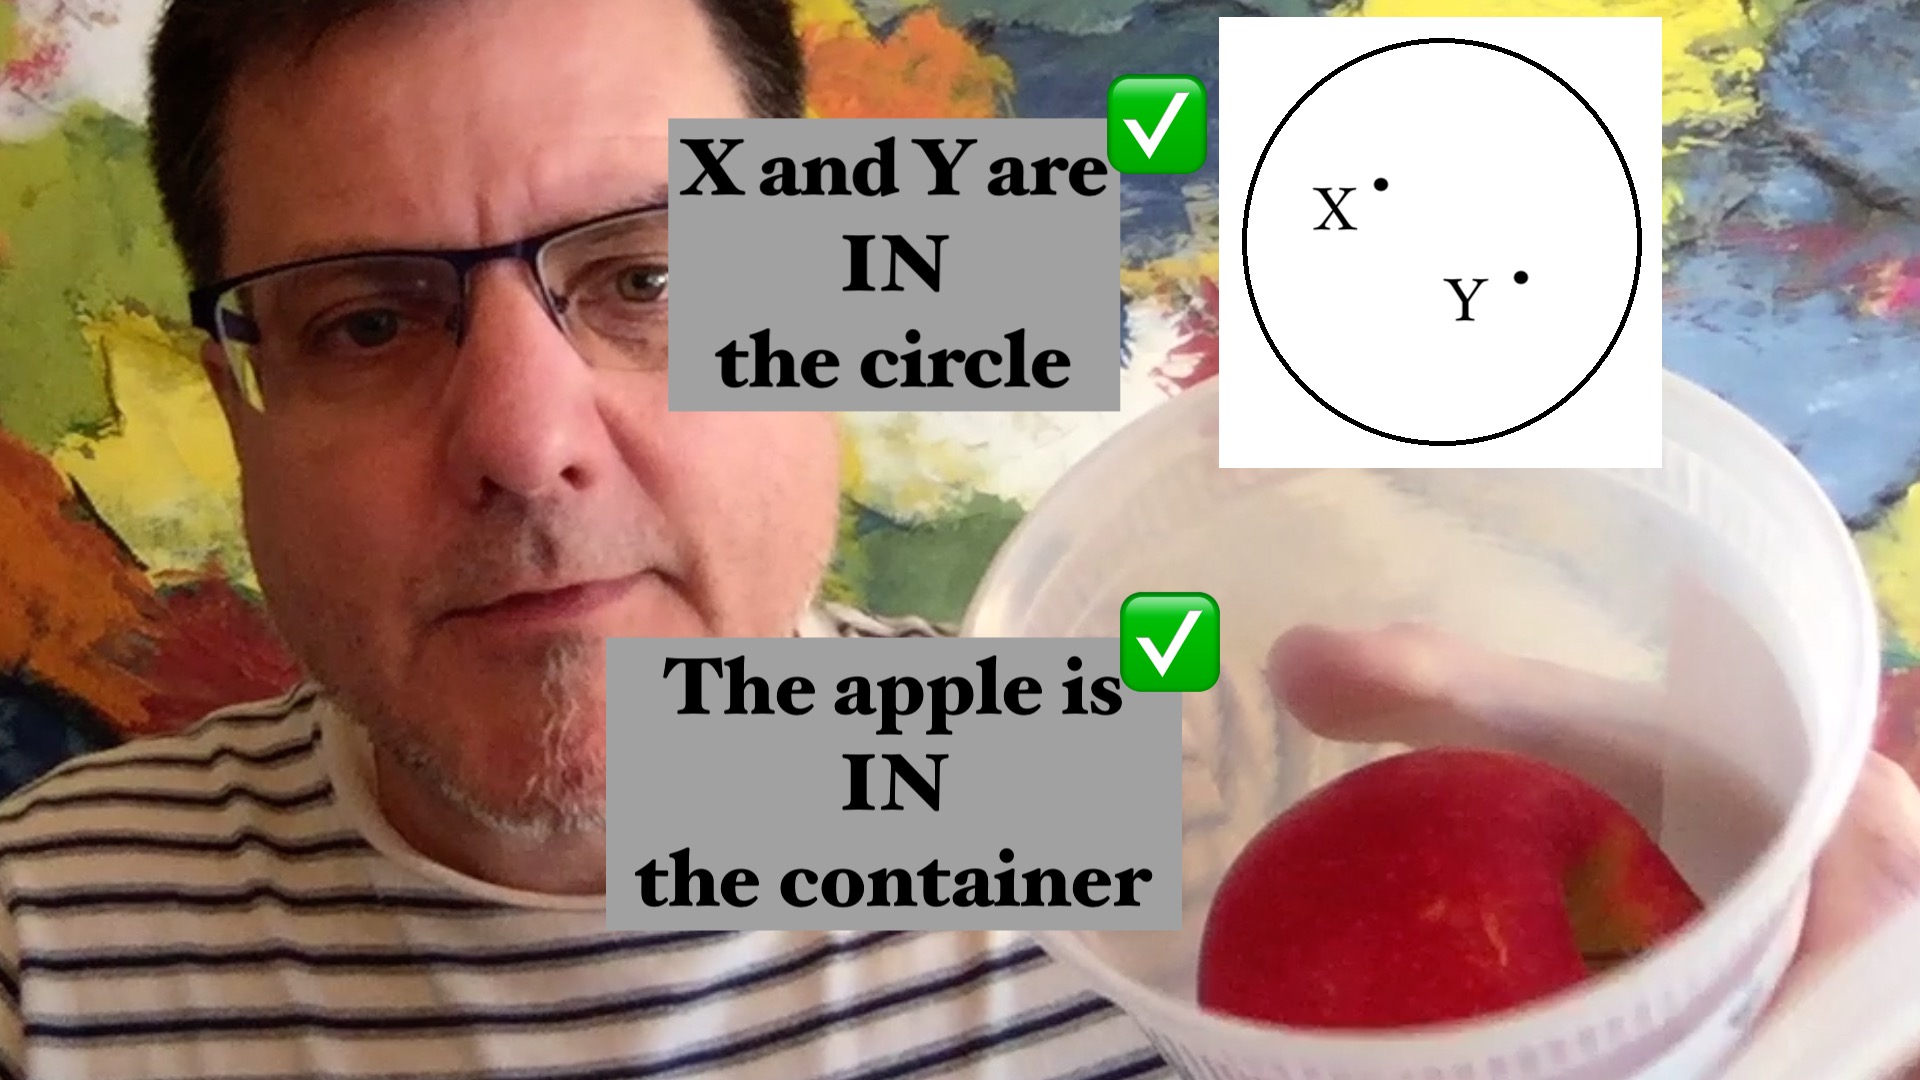 an apple in a container, text: The apple is in the container; circle with X and Y in it, text: X and Y are in the circle